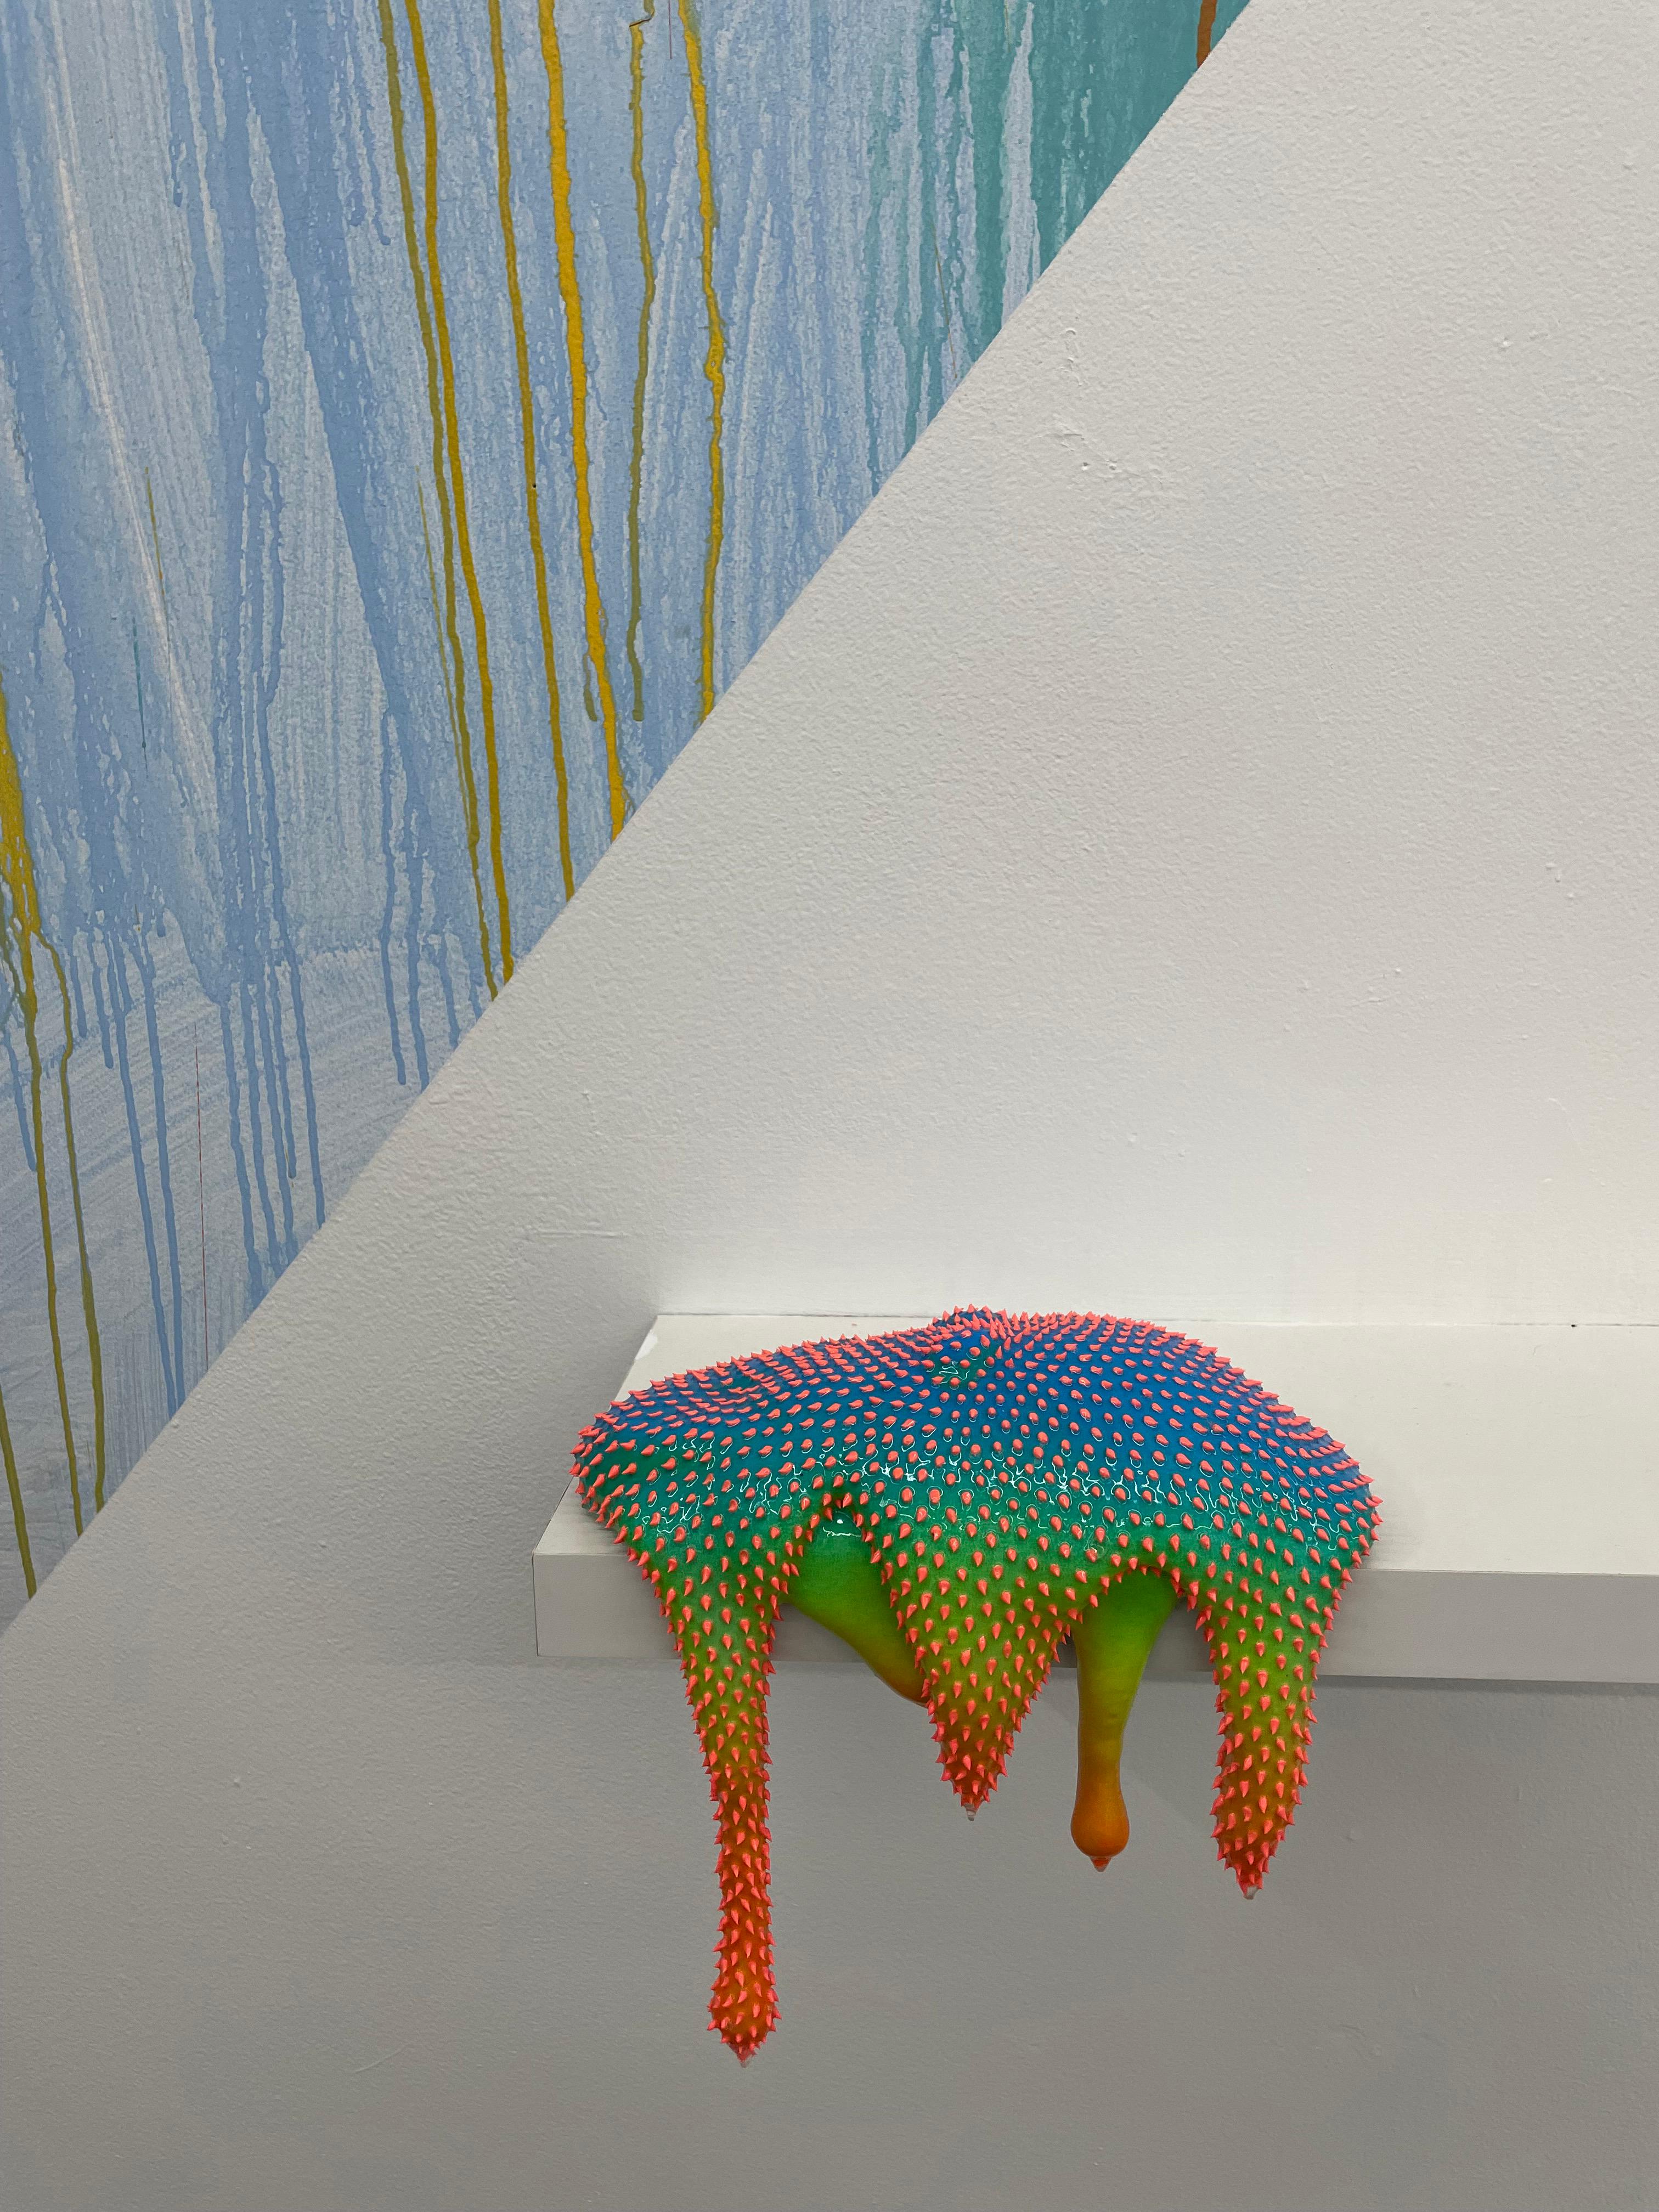 Artist:  Dan Lam
Title:  Drip
Size: 8.5 x 11 x 6 inches  
Medium:  Polyurethane foam, resin and acrylic sculpture
Edition:  Original 
Year:  2018 
Notes: Signed and Dated on the bottom.

Dan Lam, an Instagram sensation, has captivated audiences with